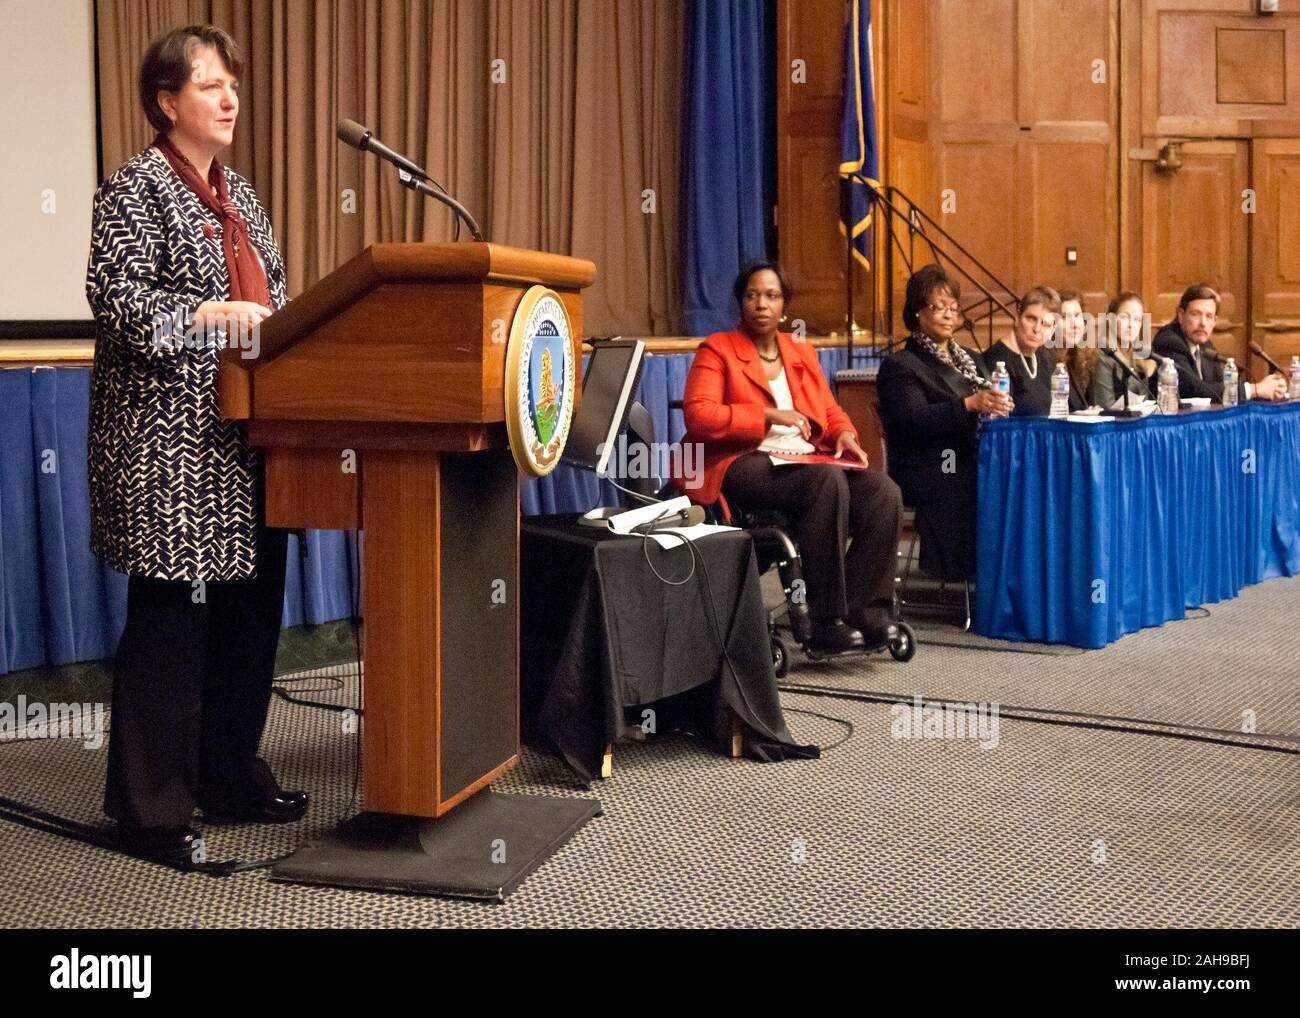 Dr. Kathleen Merrigan, Deputy Secretary addresses U.S. Department of Agriculture employees during National Disability Employment Awareness Month in Washington, DC, Wednesday, October 5, 2011. To Dr. Merrigan’s left are: Carmen Jones, Senior Advisor, Departmental Management the moderator of the USDA Panel of Success: Hiring and Employing Individuals with Disabilities and panel members Elaine Jones, Food and Nutrition Service, Robin Heard, Deputy Assistant Secretary for Administration, Francesca Yabraian, Office of the Deputy Assistant Secretary for Administration, Gari Jo Green, Office of Inspe Stock Photo